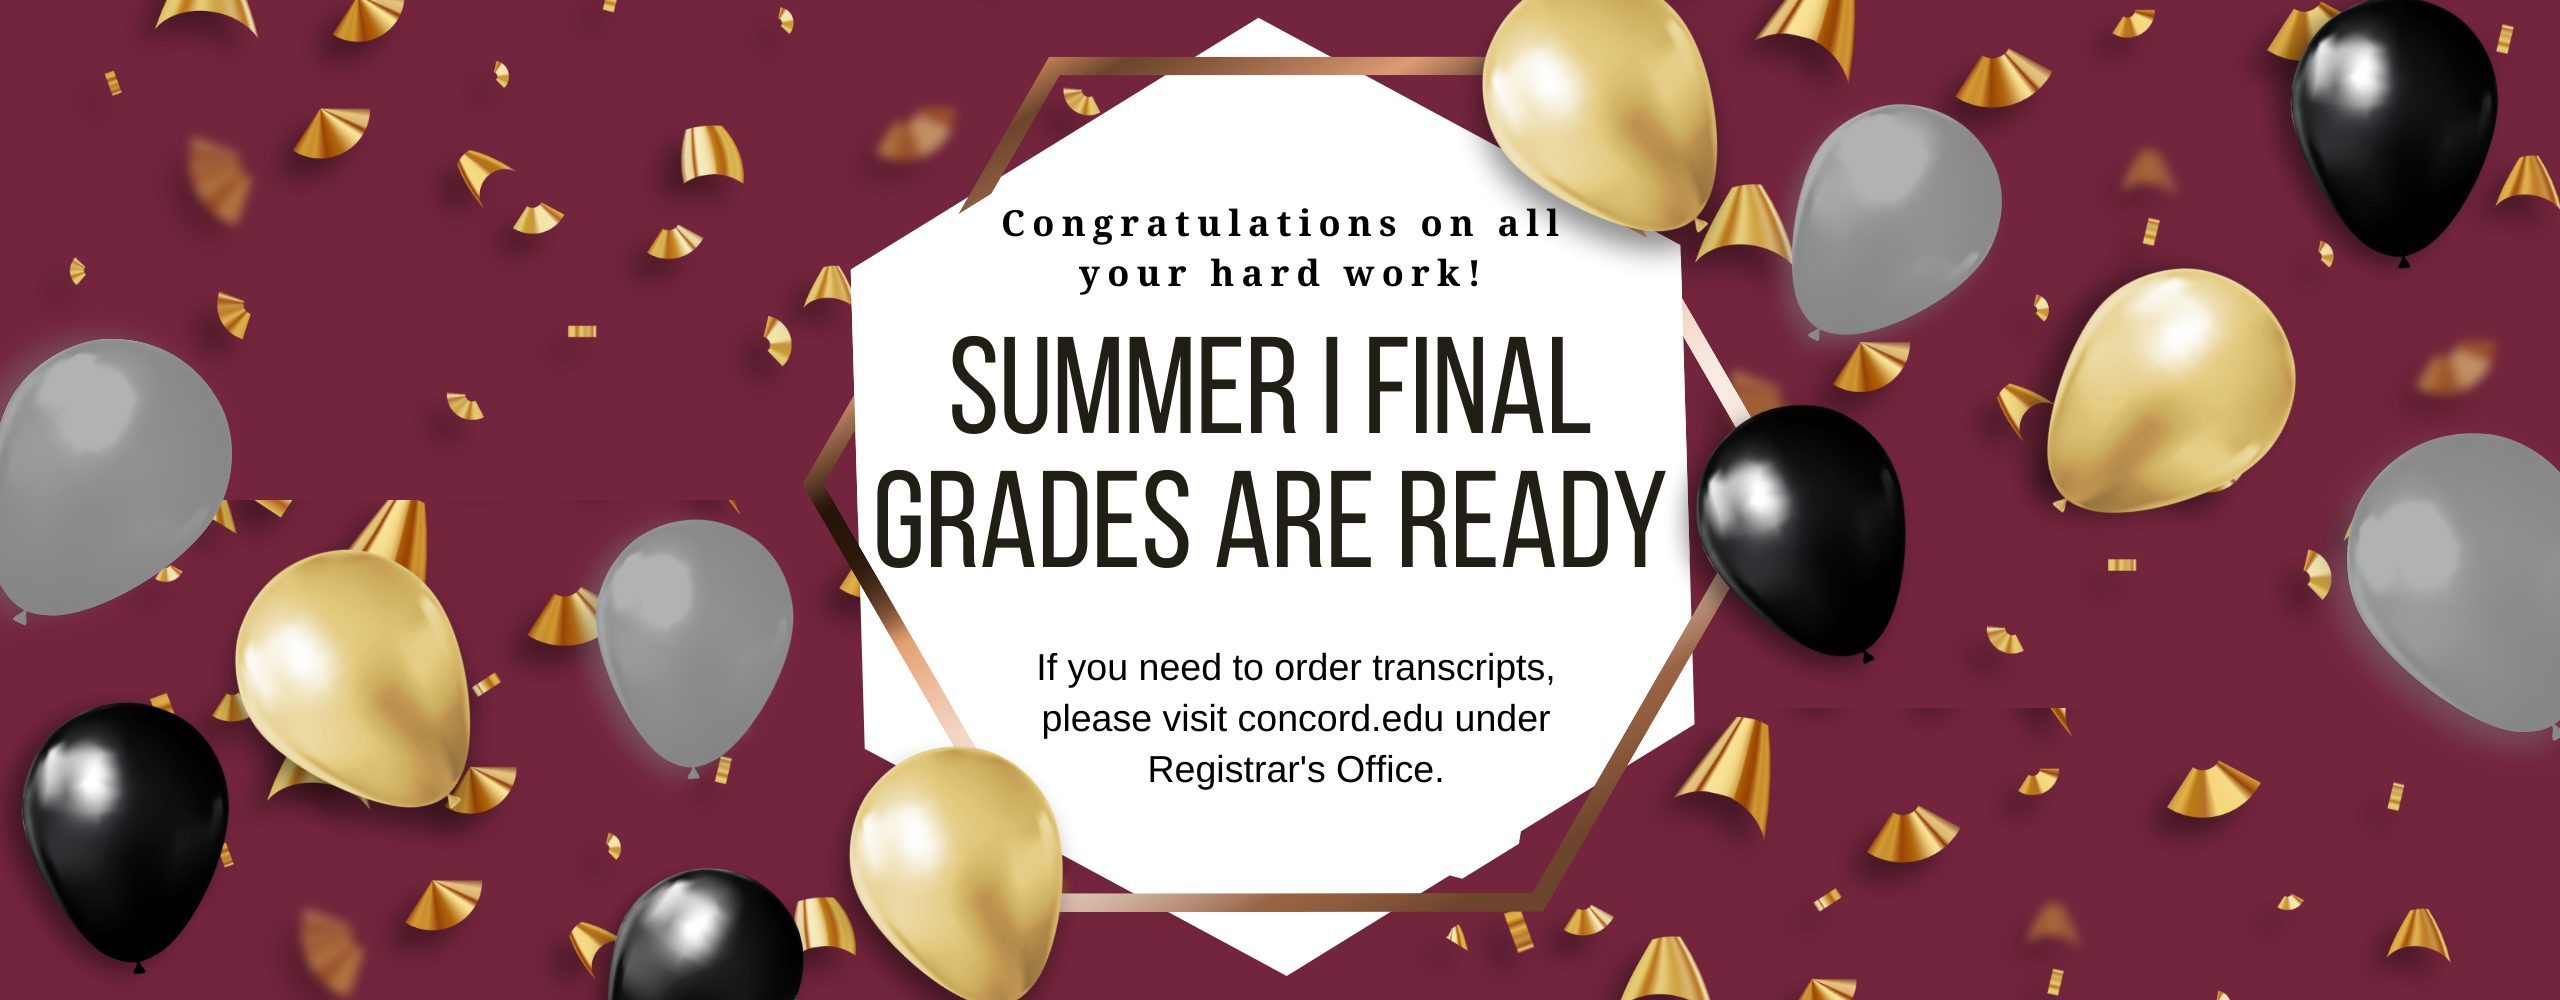 Students - congratulations on all your hard work! Summer 1 final grades are ready. If you need to order transcripts, please visit concord.edu/academics/registrar to read more about how to order transcripts